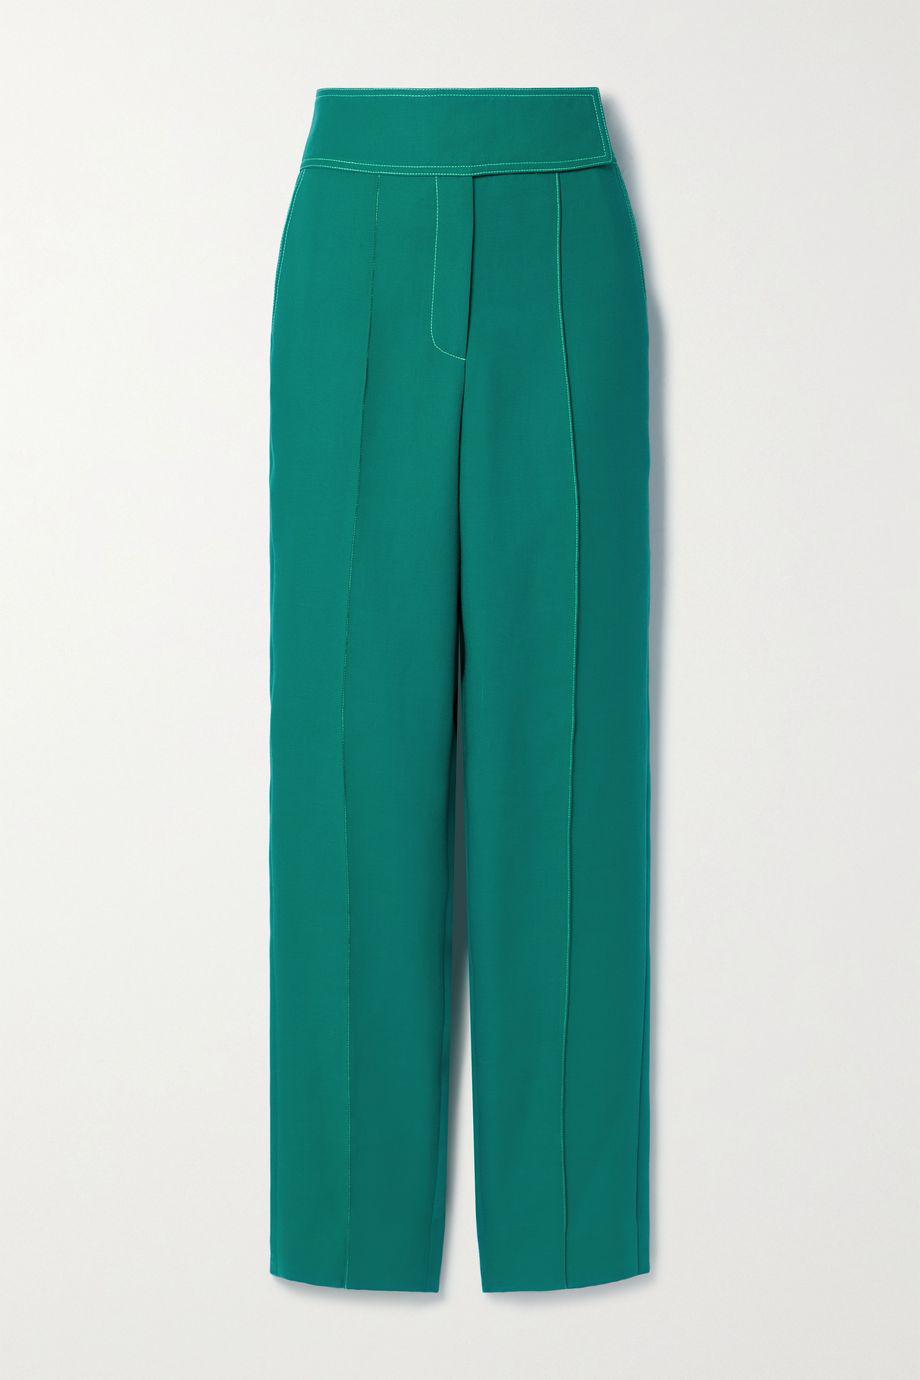 Pleated crepe straight-leg pants by CHRISTOPHER JOHN ROGERS